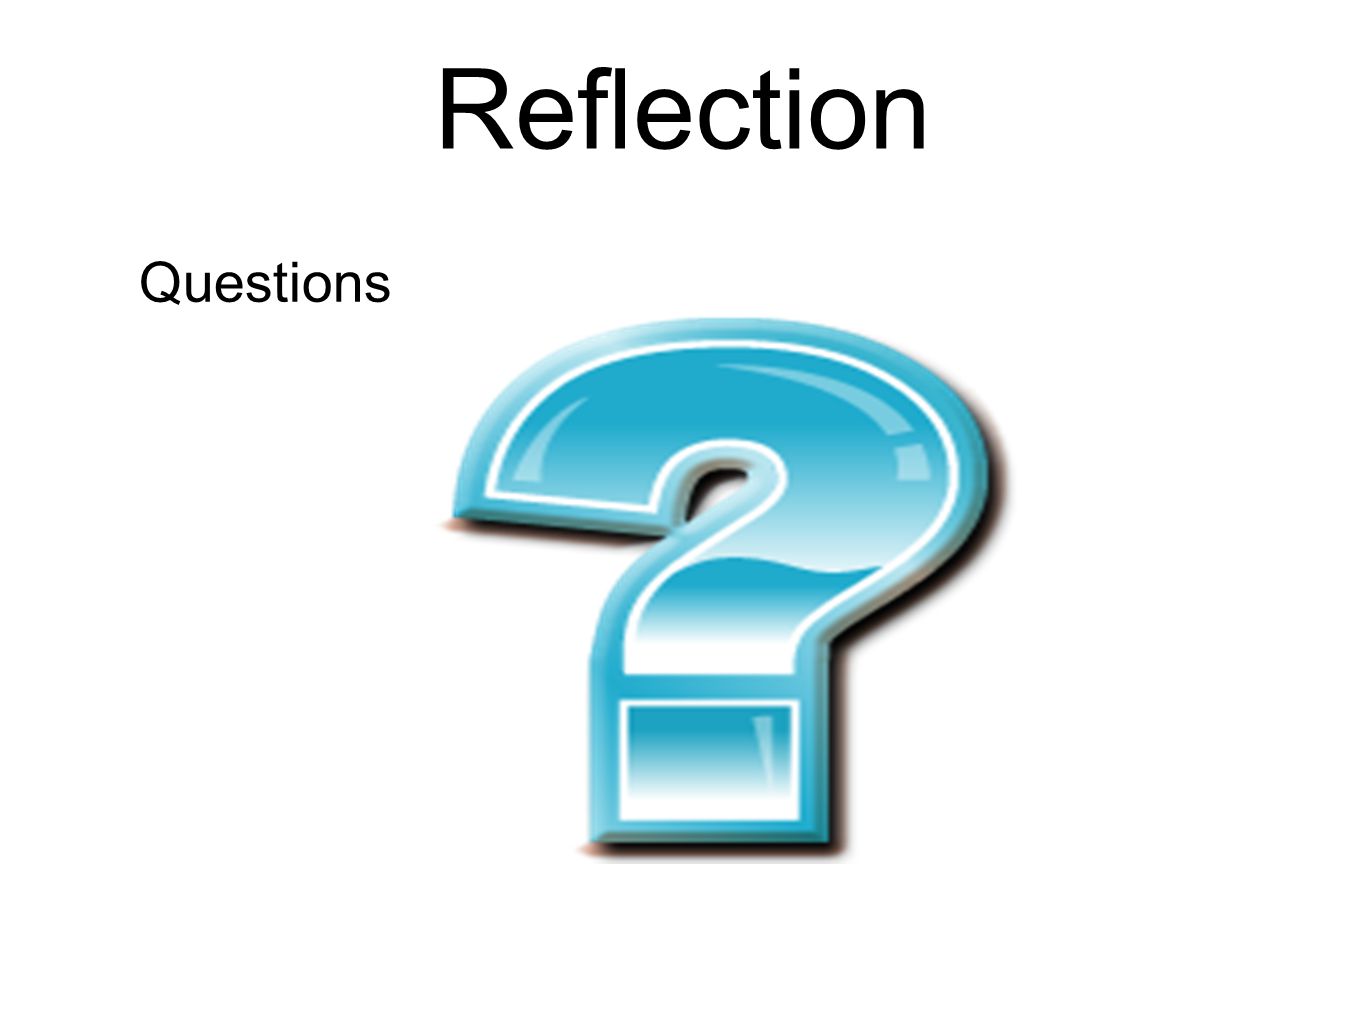 Reflection Questions